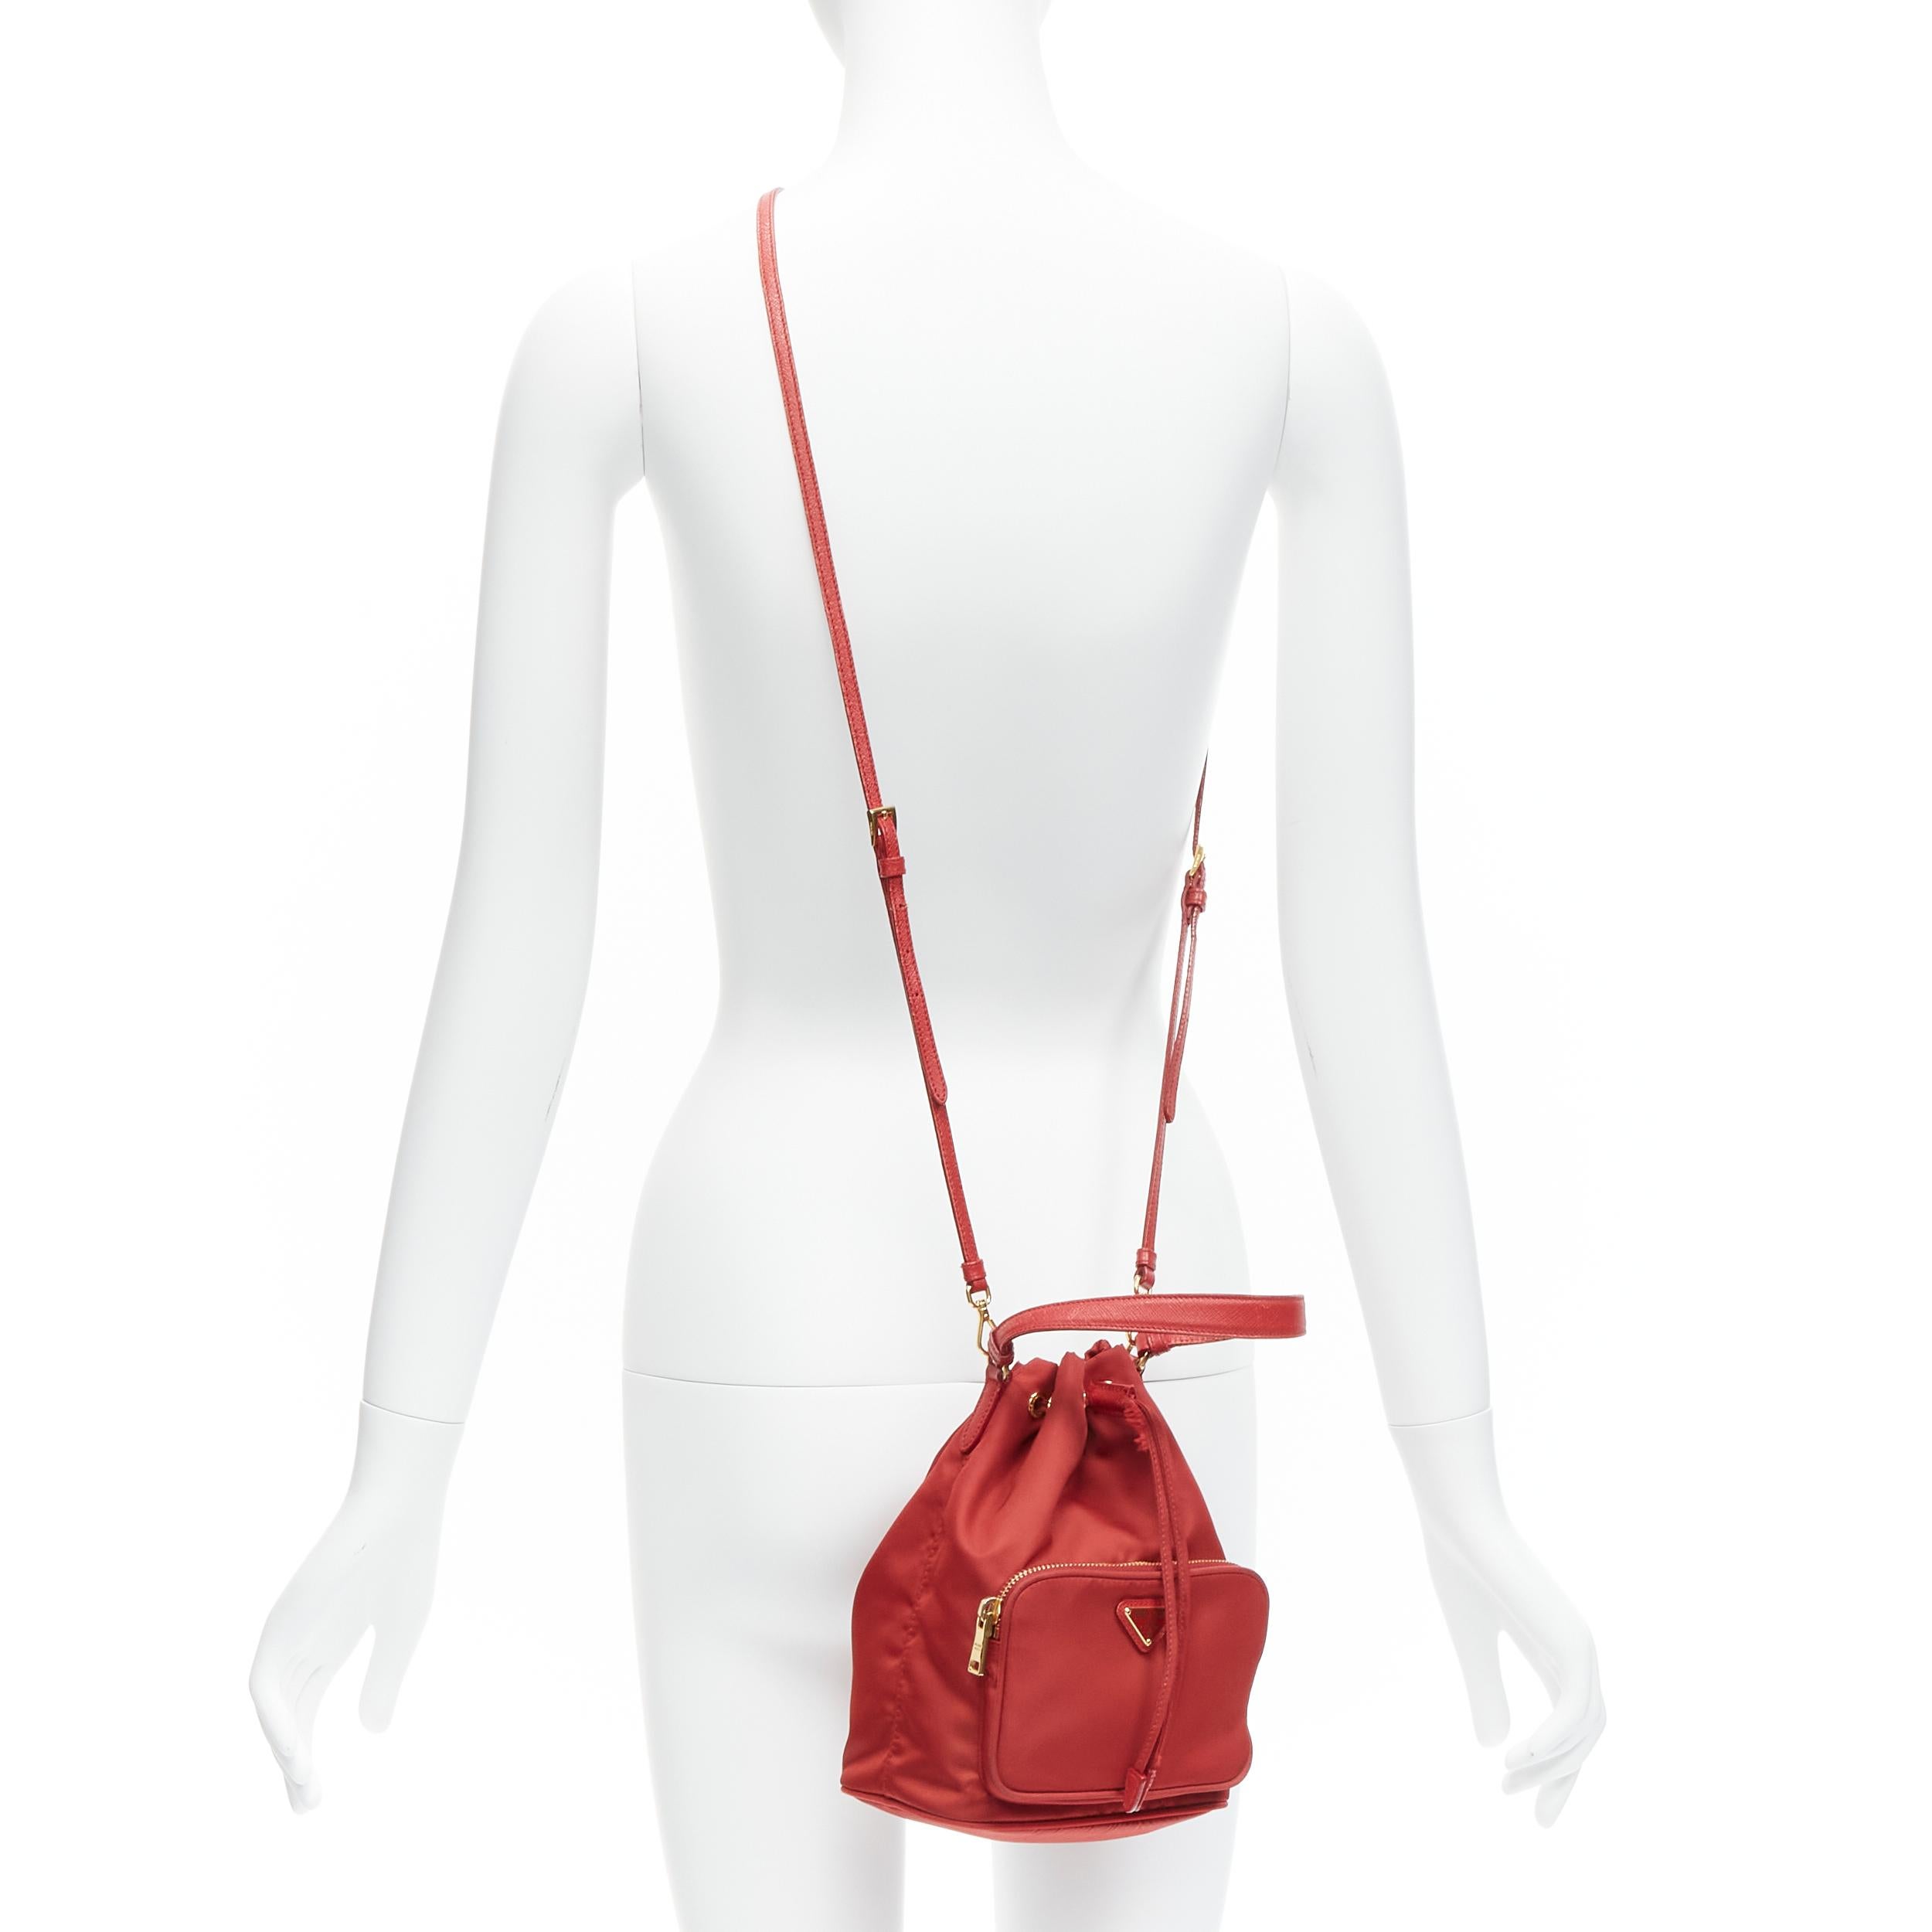 PRADA red nylon gold triangle plate drawstring bucket crossbody shoulder bag
Reference: TGAS/D00083
Brand: Prada
Designer: Miuccia Prada
Material: Nylon, Leather
Color: Red, Gold
Pattern: Solid
Closure: Drawstring
Lining: Red Fabric
Extra Details: